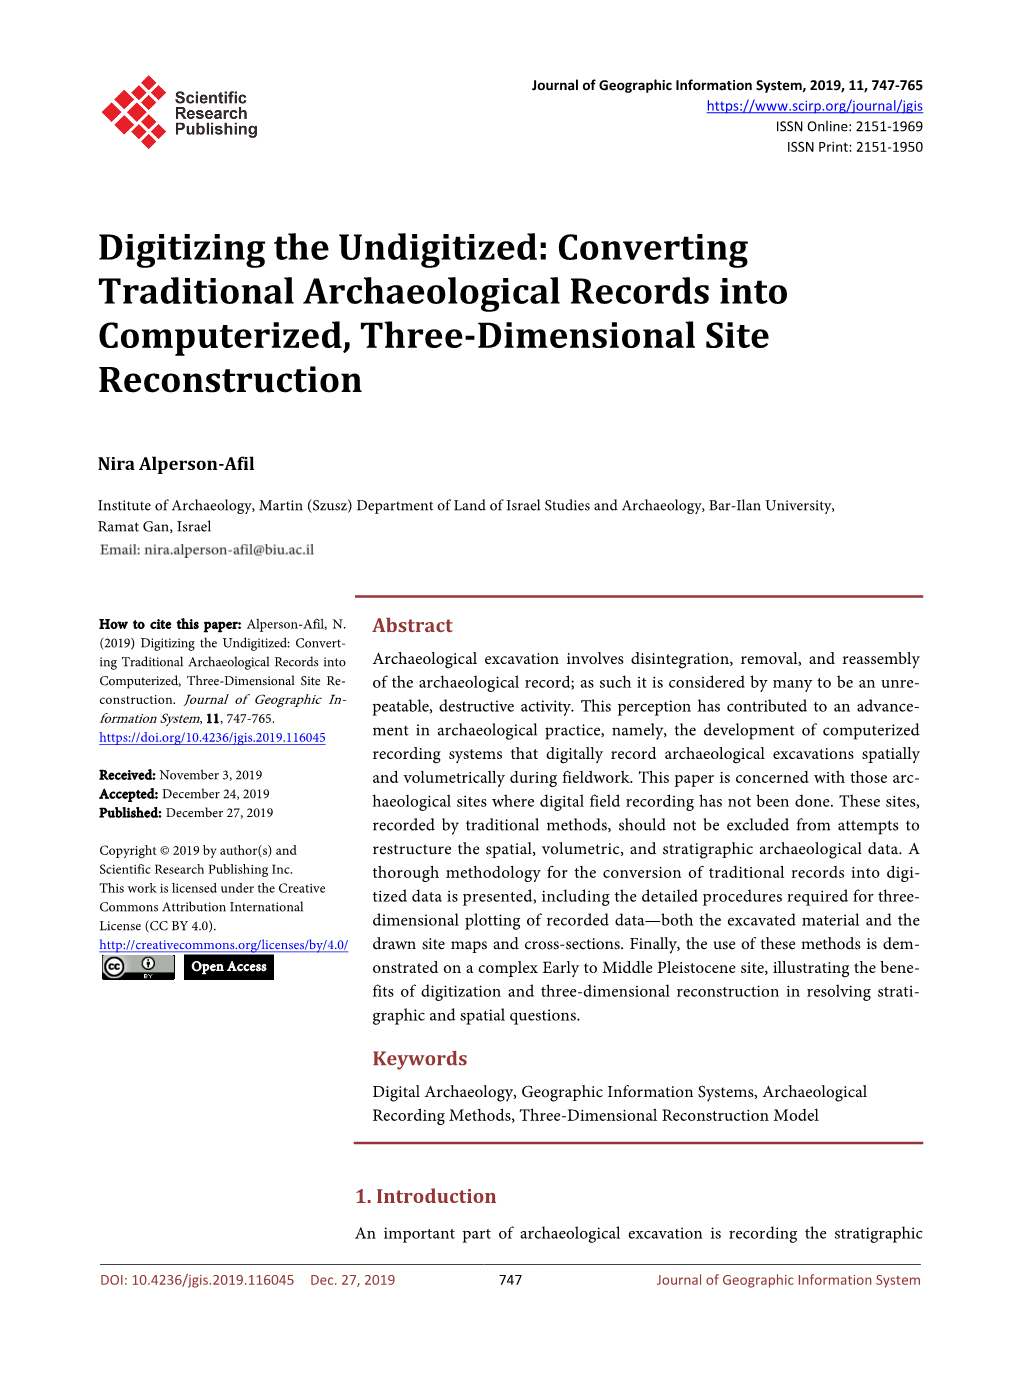 Converting Traditional Archaeological Records Into Computerized, Three-Dimensional Site Reconstruction